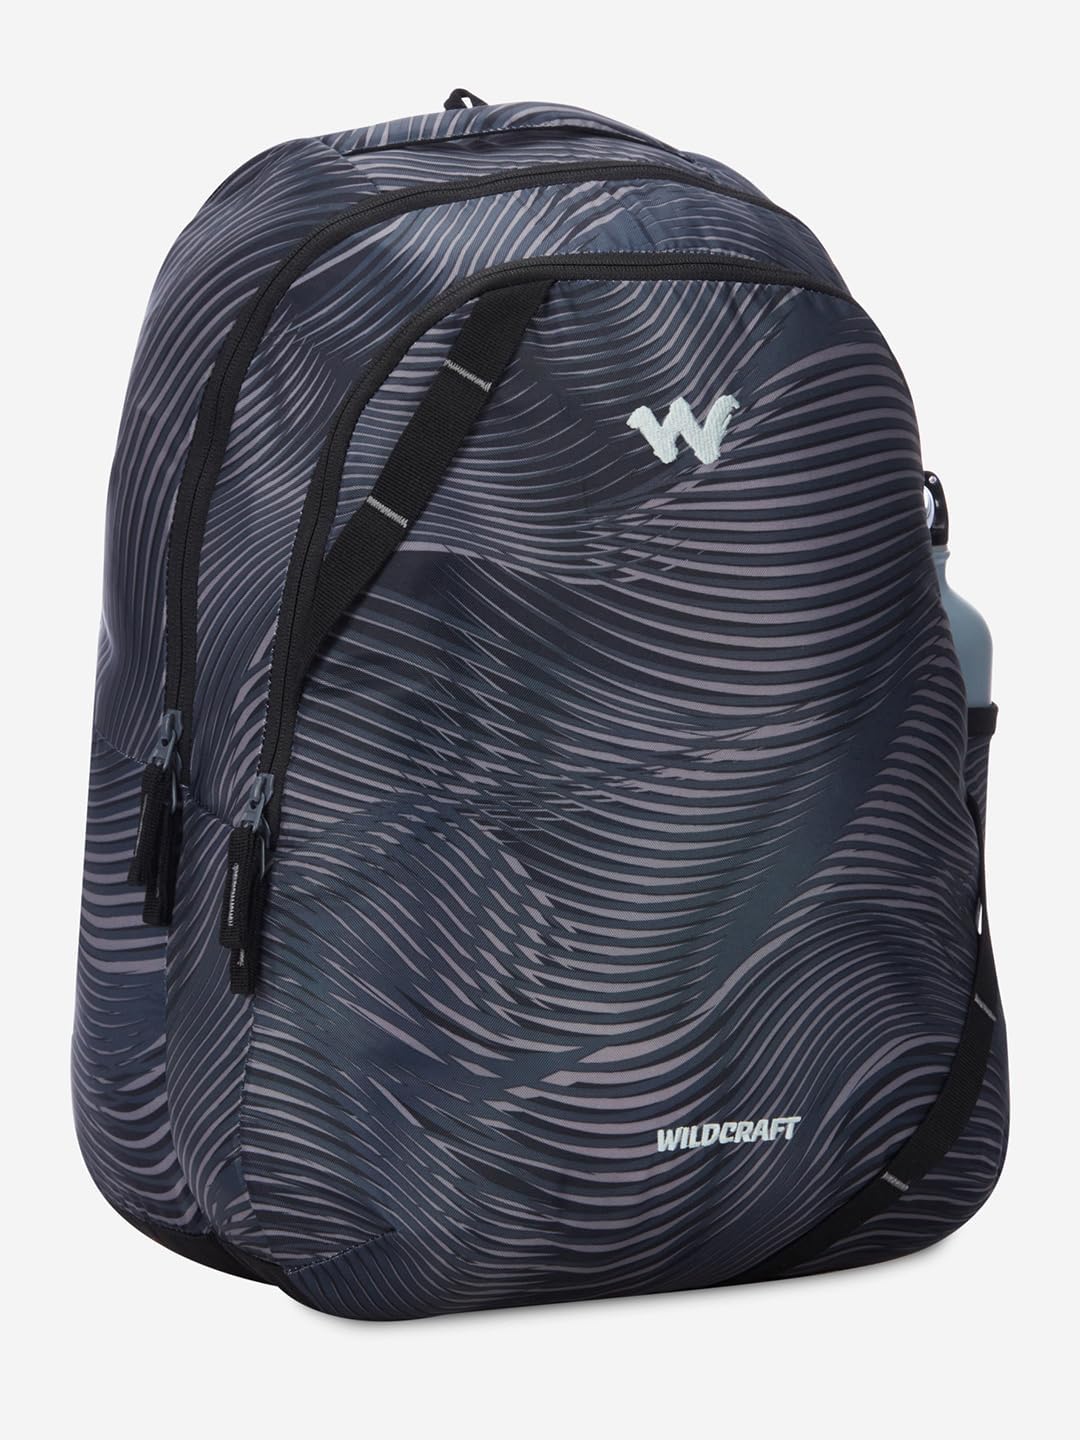 Wildcraft Large Backpack Bravo RC Contour Black 35 L |  Bags & Sleeves |  Halabh.com